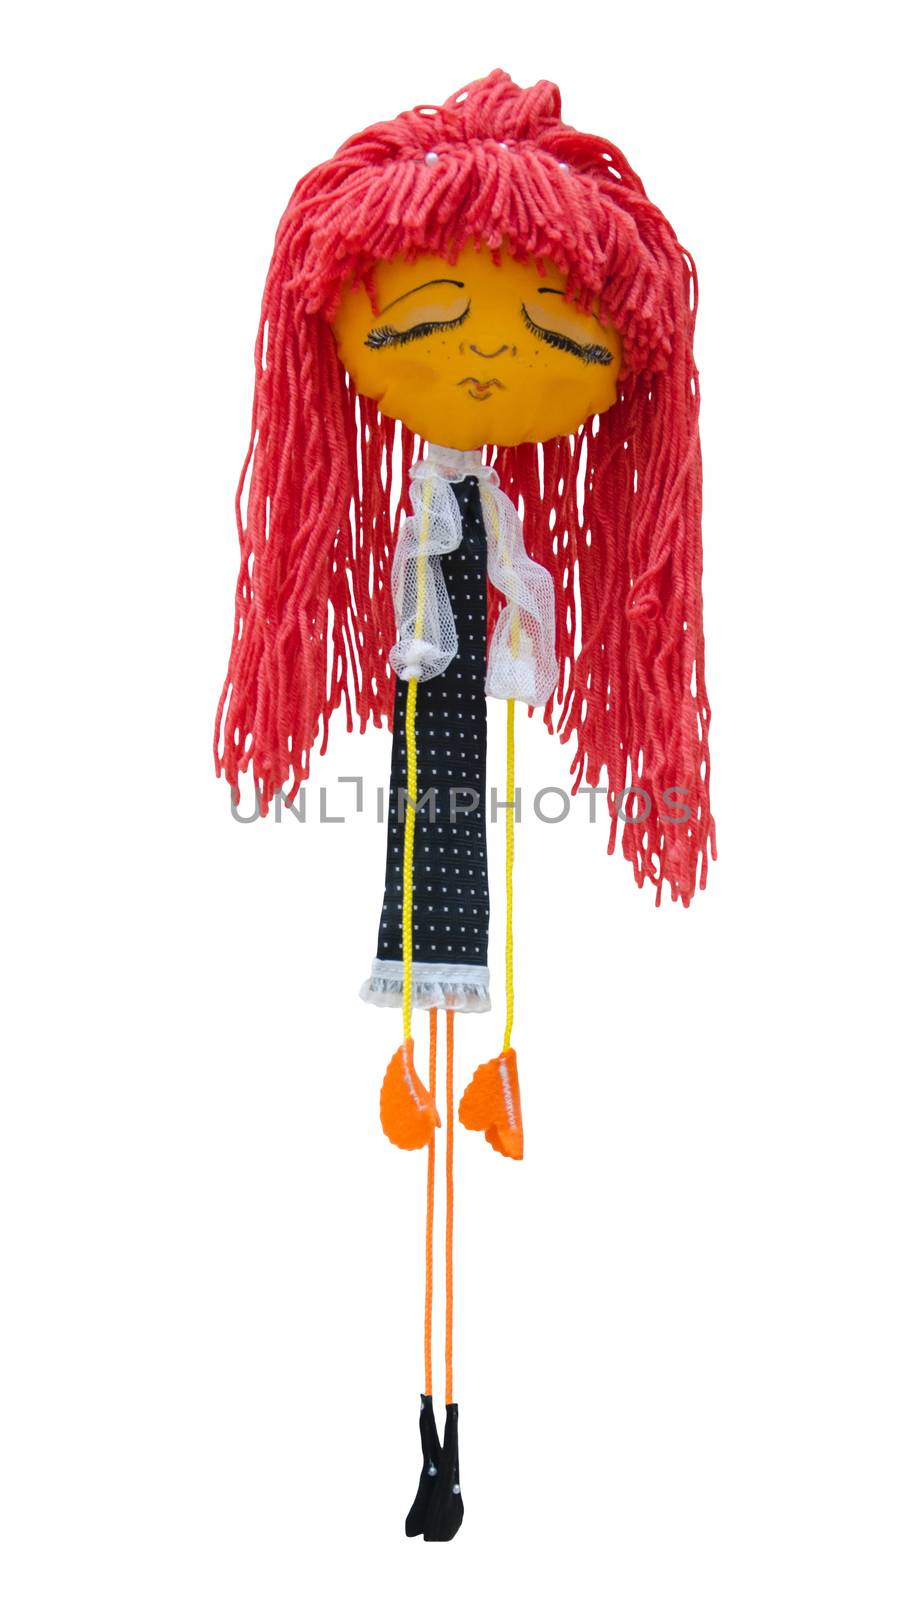 The handmade doll toy isolated thin embarrassed sad girl in a dress with mesh sleeves